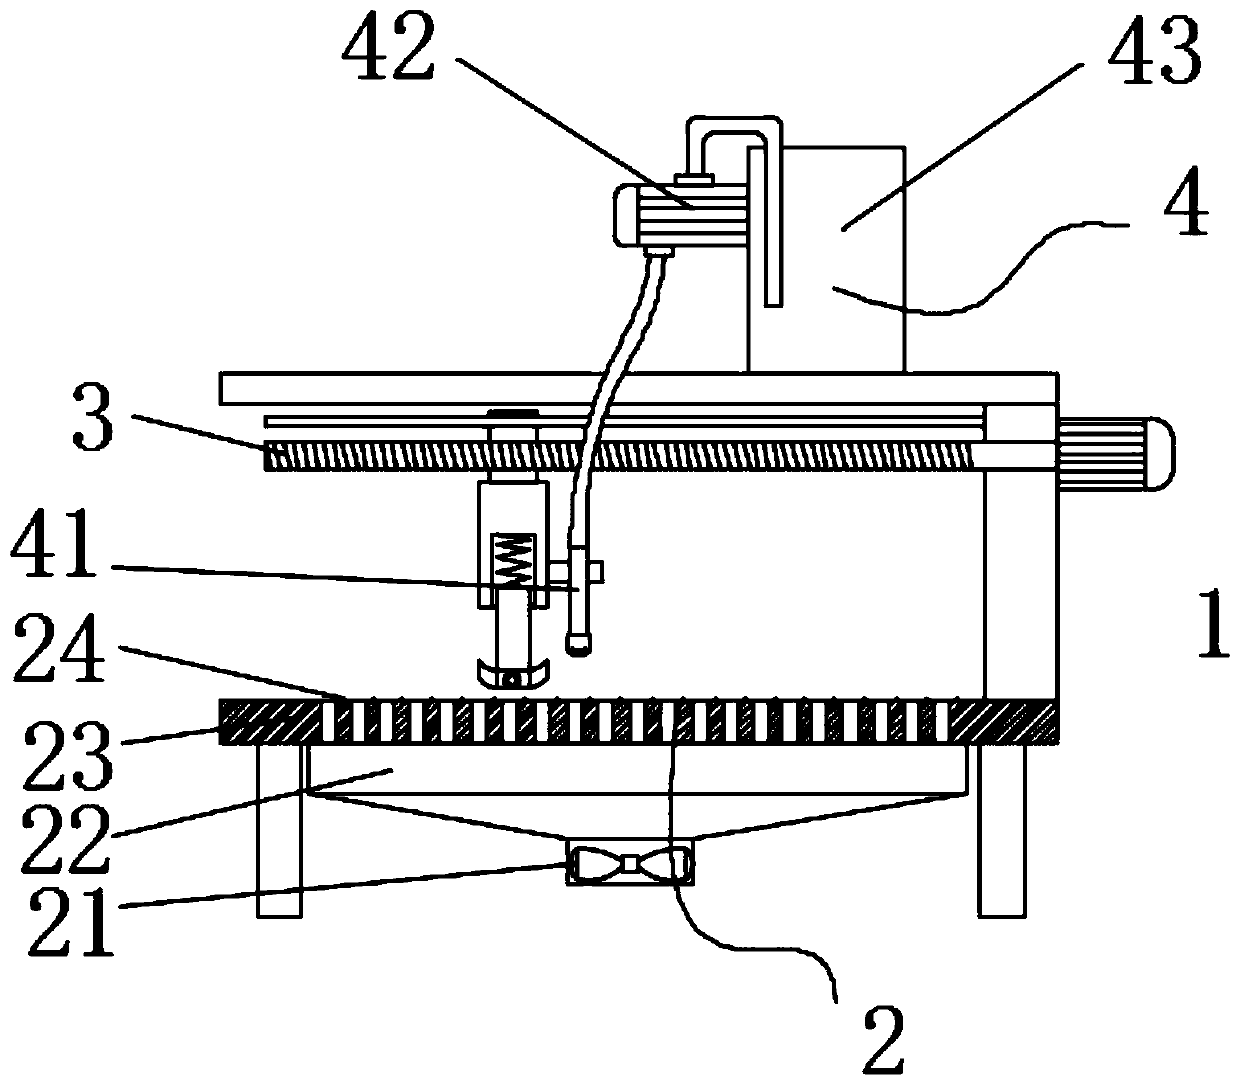 Automatic sweater production system of integrated garment